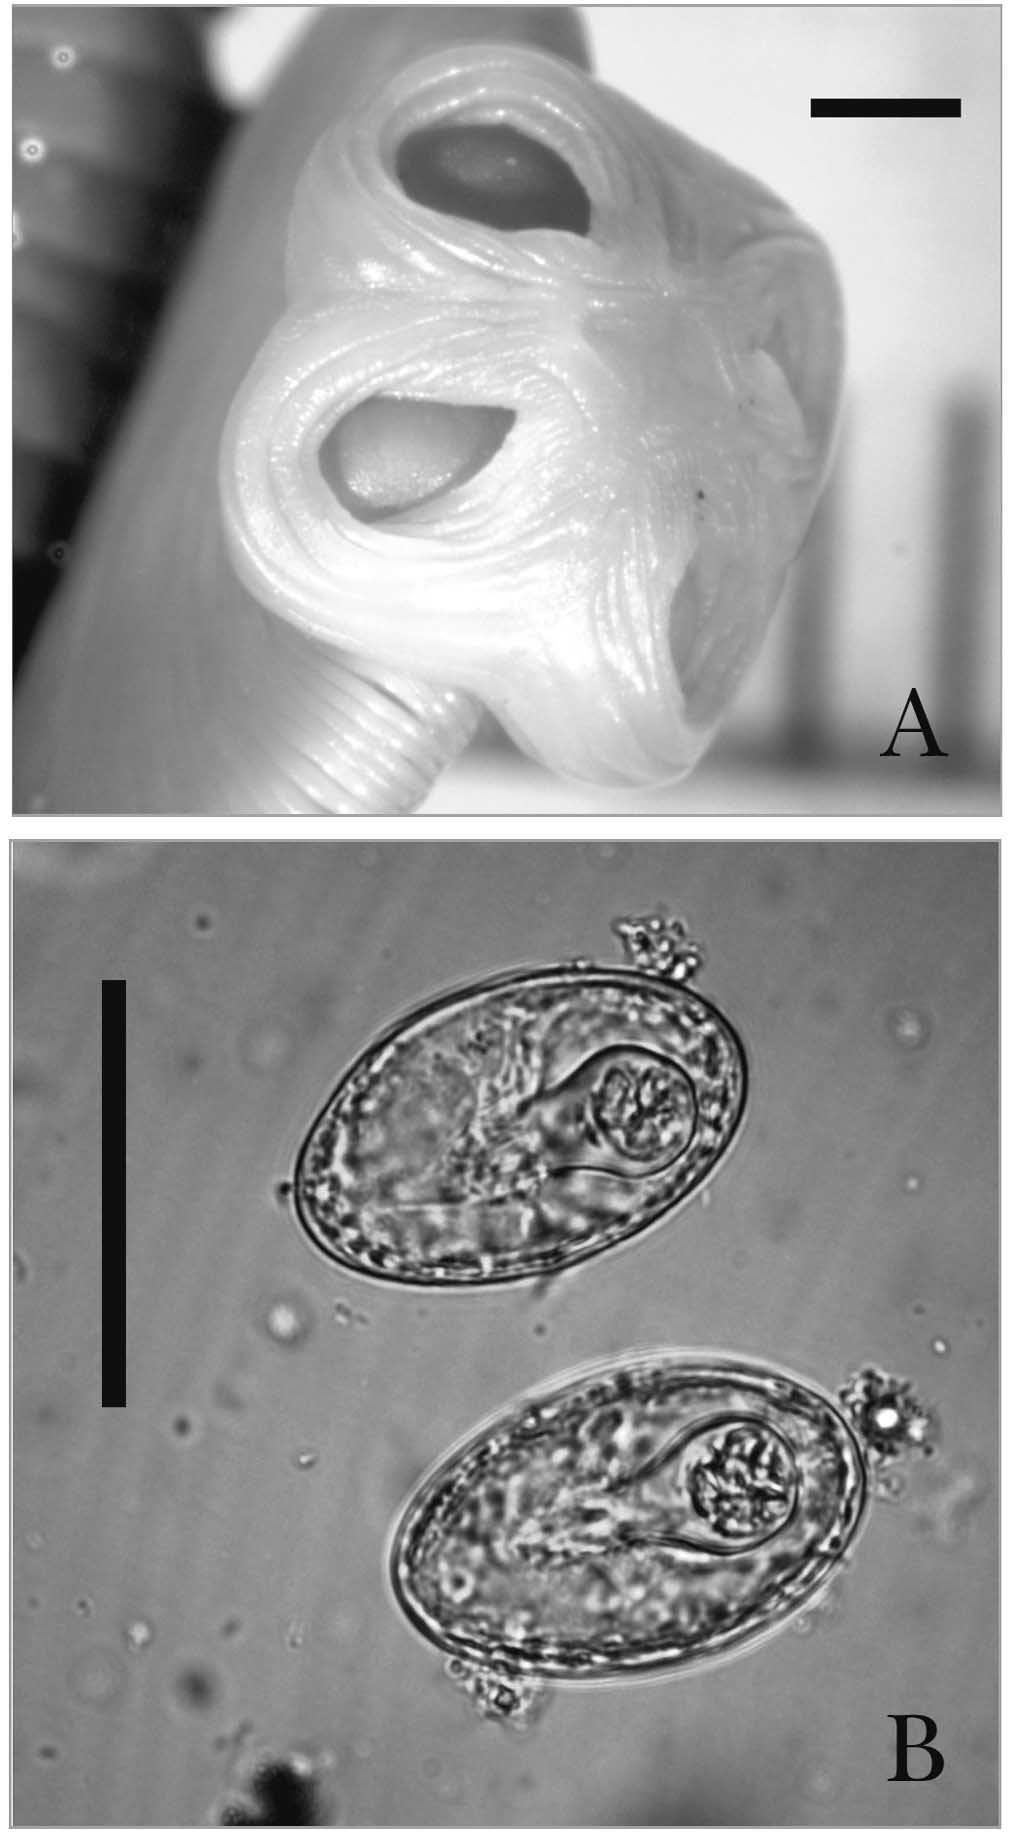 122 Voitto Haukisalmi Fig. 3. Anoplocephaloides indicata from Tapirus indicus. A scolex in apical view (Thailand). Scale bar = 1.0 mm. B eggs (Thailand). Scale bar = 0.